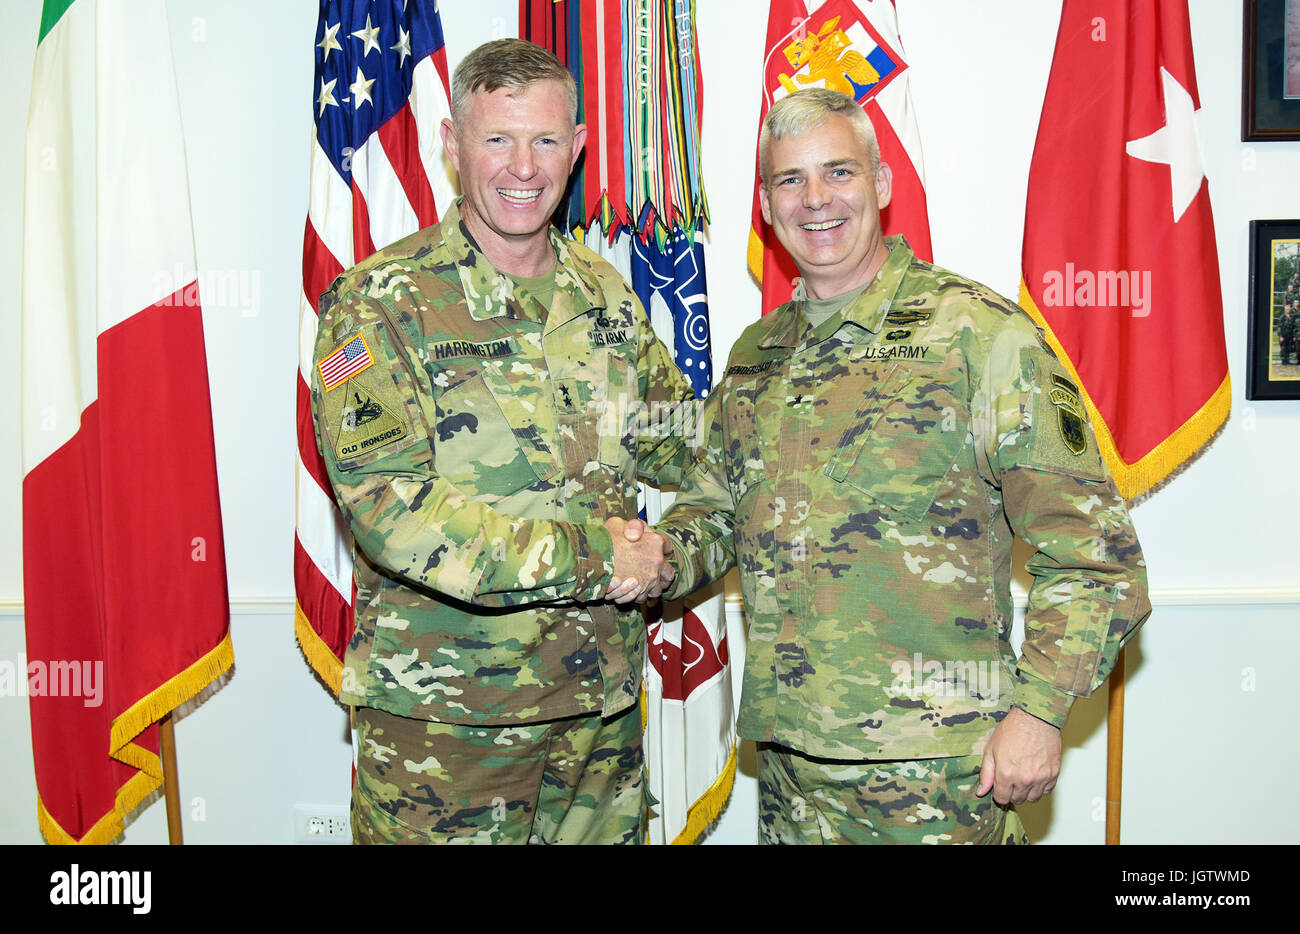 From left, Maj. Gen. Joseph P. Harrington, U.S. Army Africa Commanding General, and Brig. Gen. William J. Prendergast IV, Army National Guard Deputy Commanding General, USARAF; pose for a photograph in the USARAF commander's office during a recent visit to Caserma Ederle, Vicenza, Italy July 10, 2017. (Photo by U.S. Army Visual Information Specialist Davide Dalla Massara/Released) Stock Photo